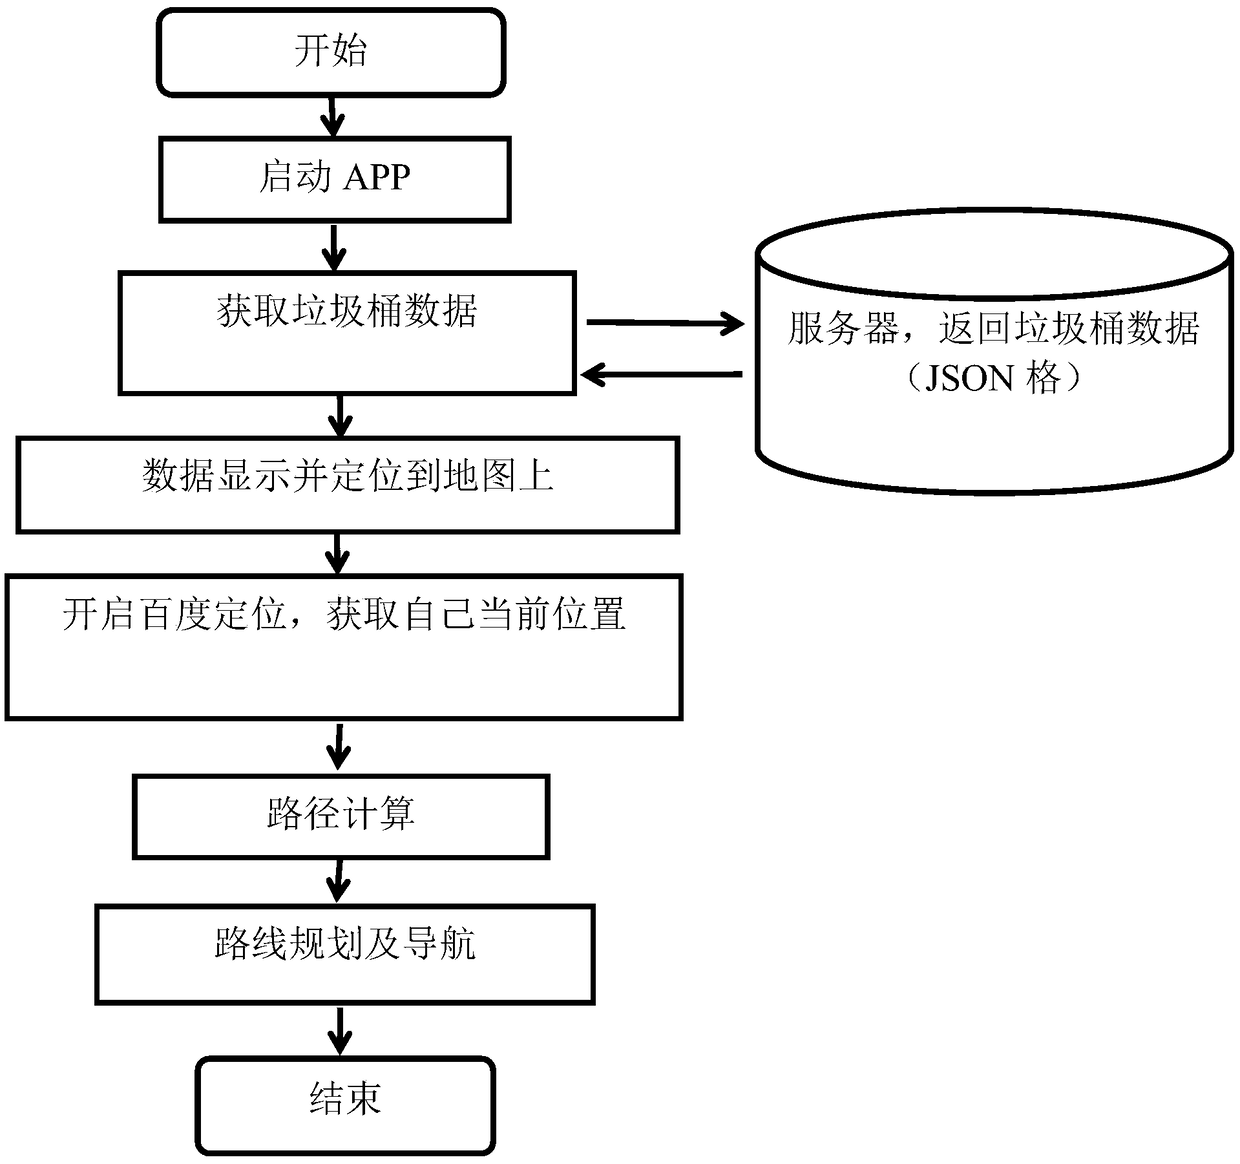 Solid waste collection and transportation system and method based on Internet-of-things technology